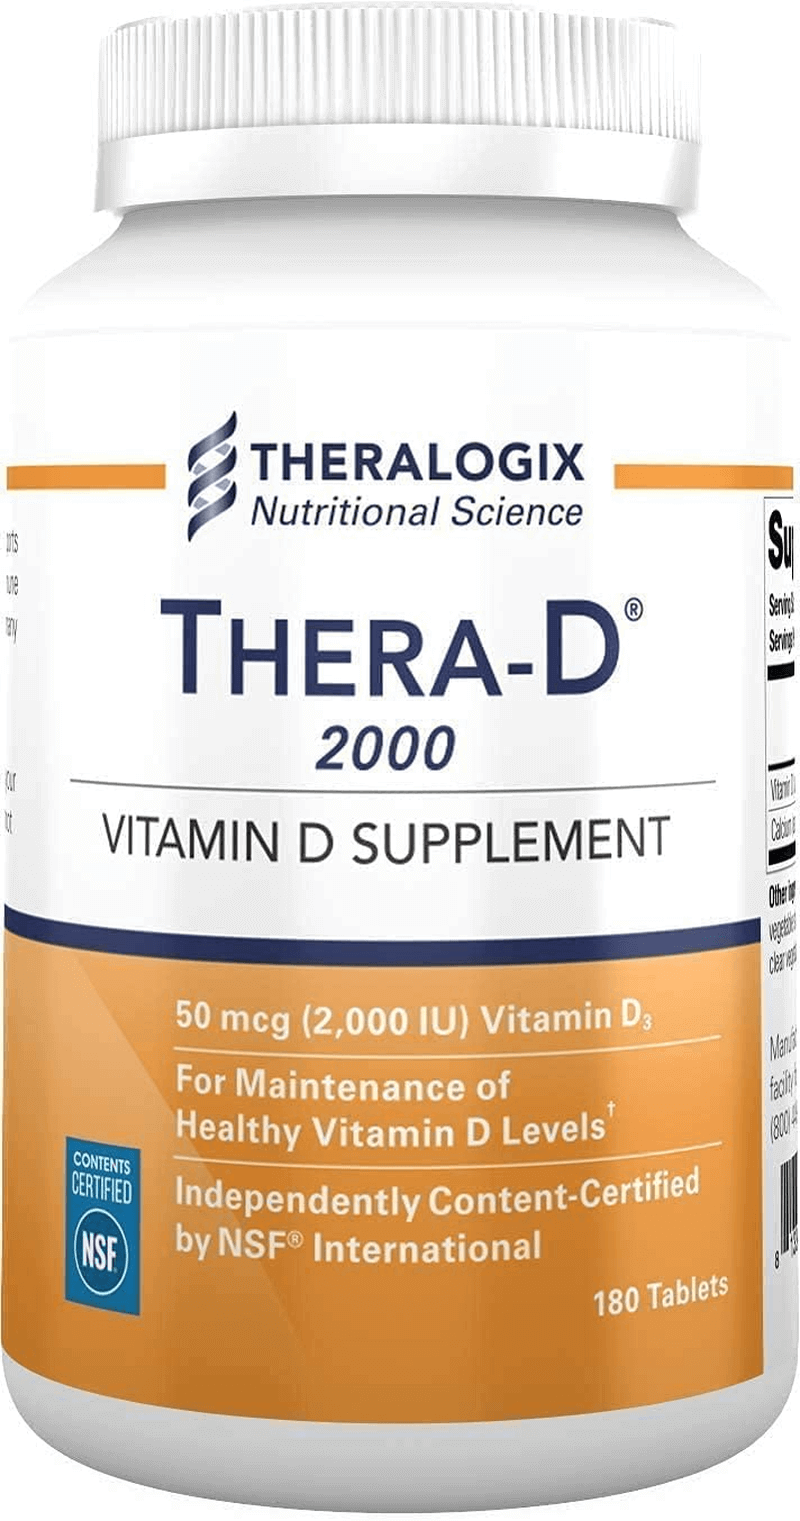 Thera-D 4000 Vitamin D Supplement | 4,000 IU Vitamin D3 Tablets | 90 Day Supply | Made in the USA - vitamenstore.com